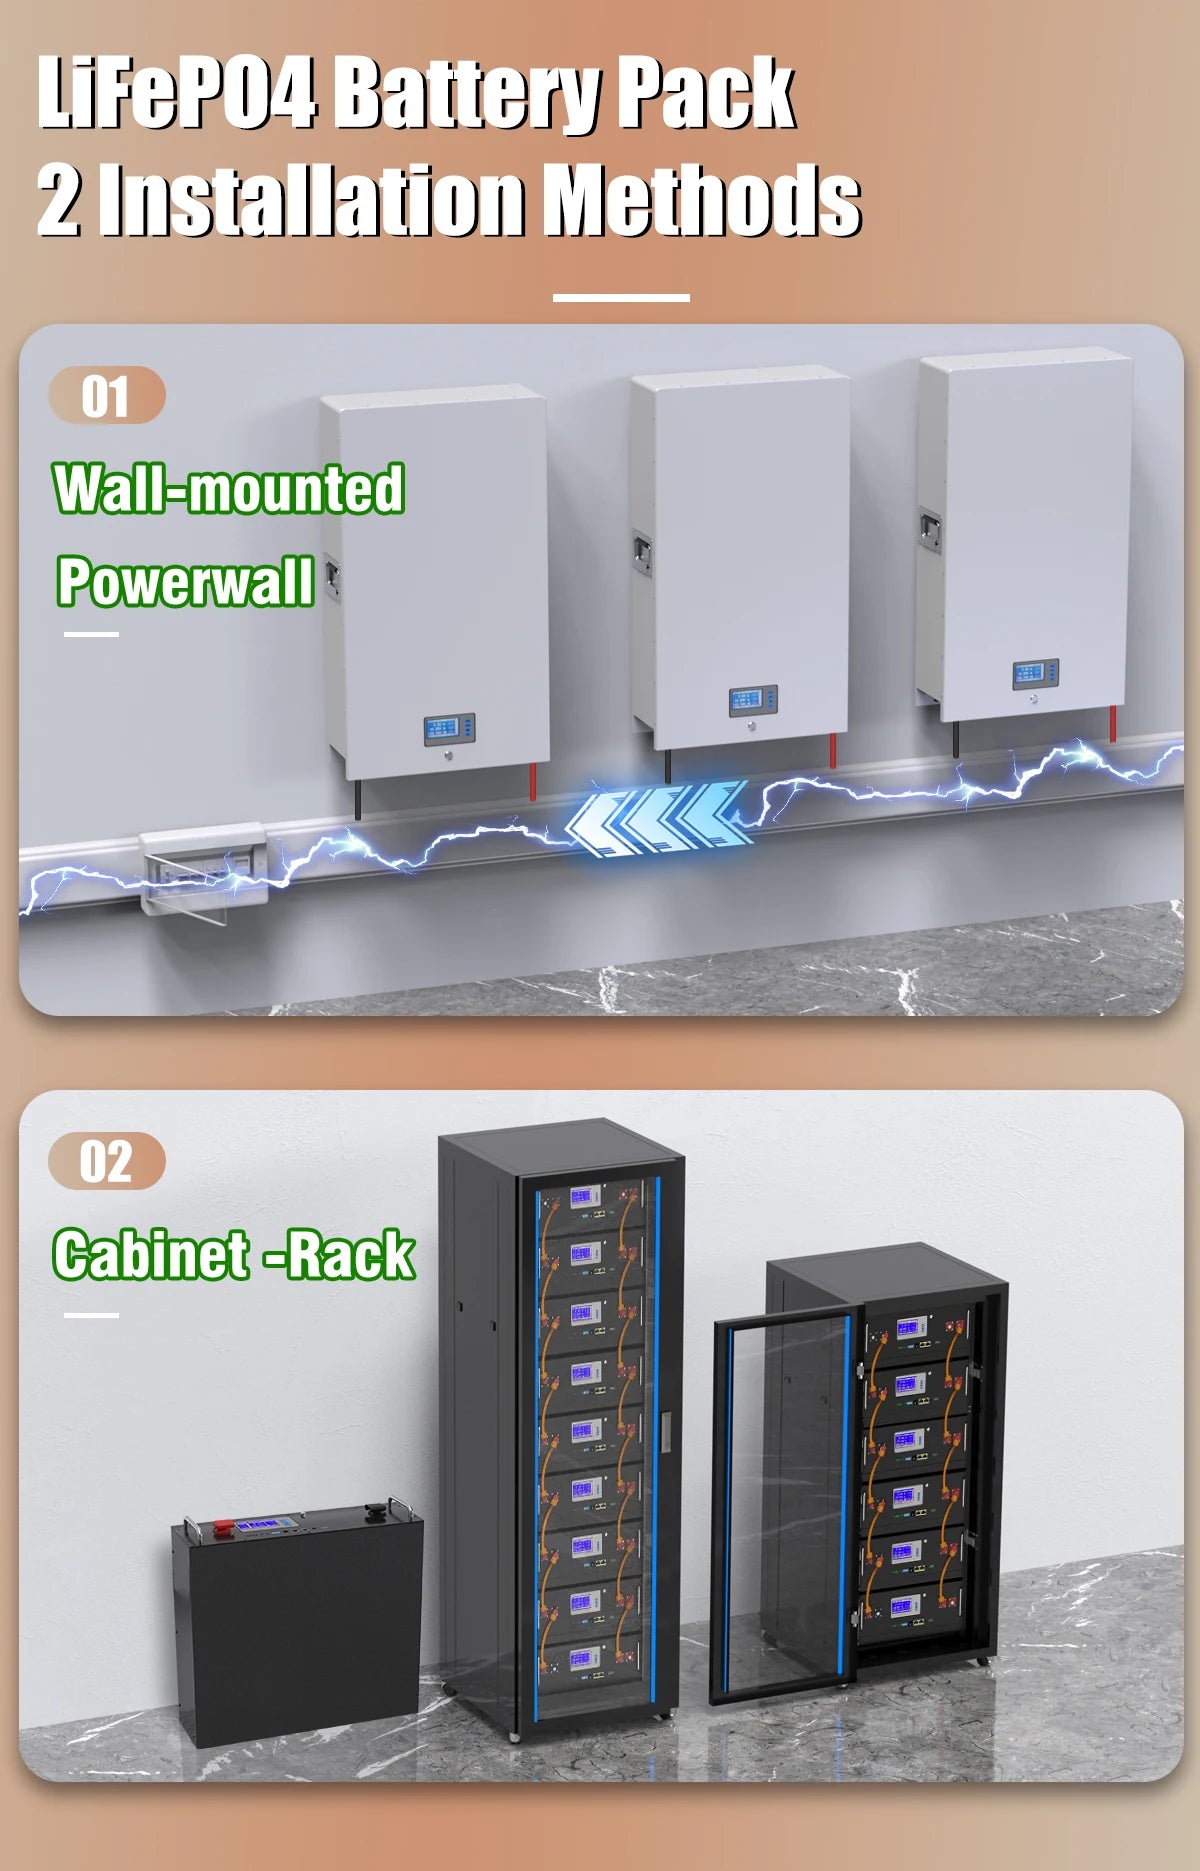 LiFePO4 Battery, Solar battery pack with 48V, 200Ah, and 10kW power for solar applications with BMS and parallel connectivity.